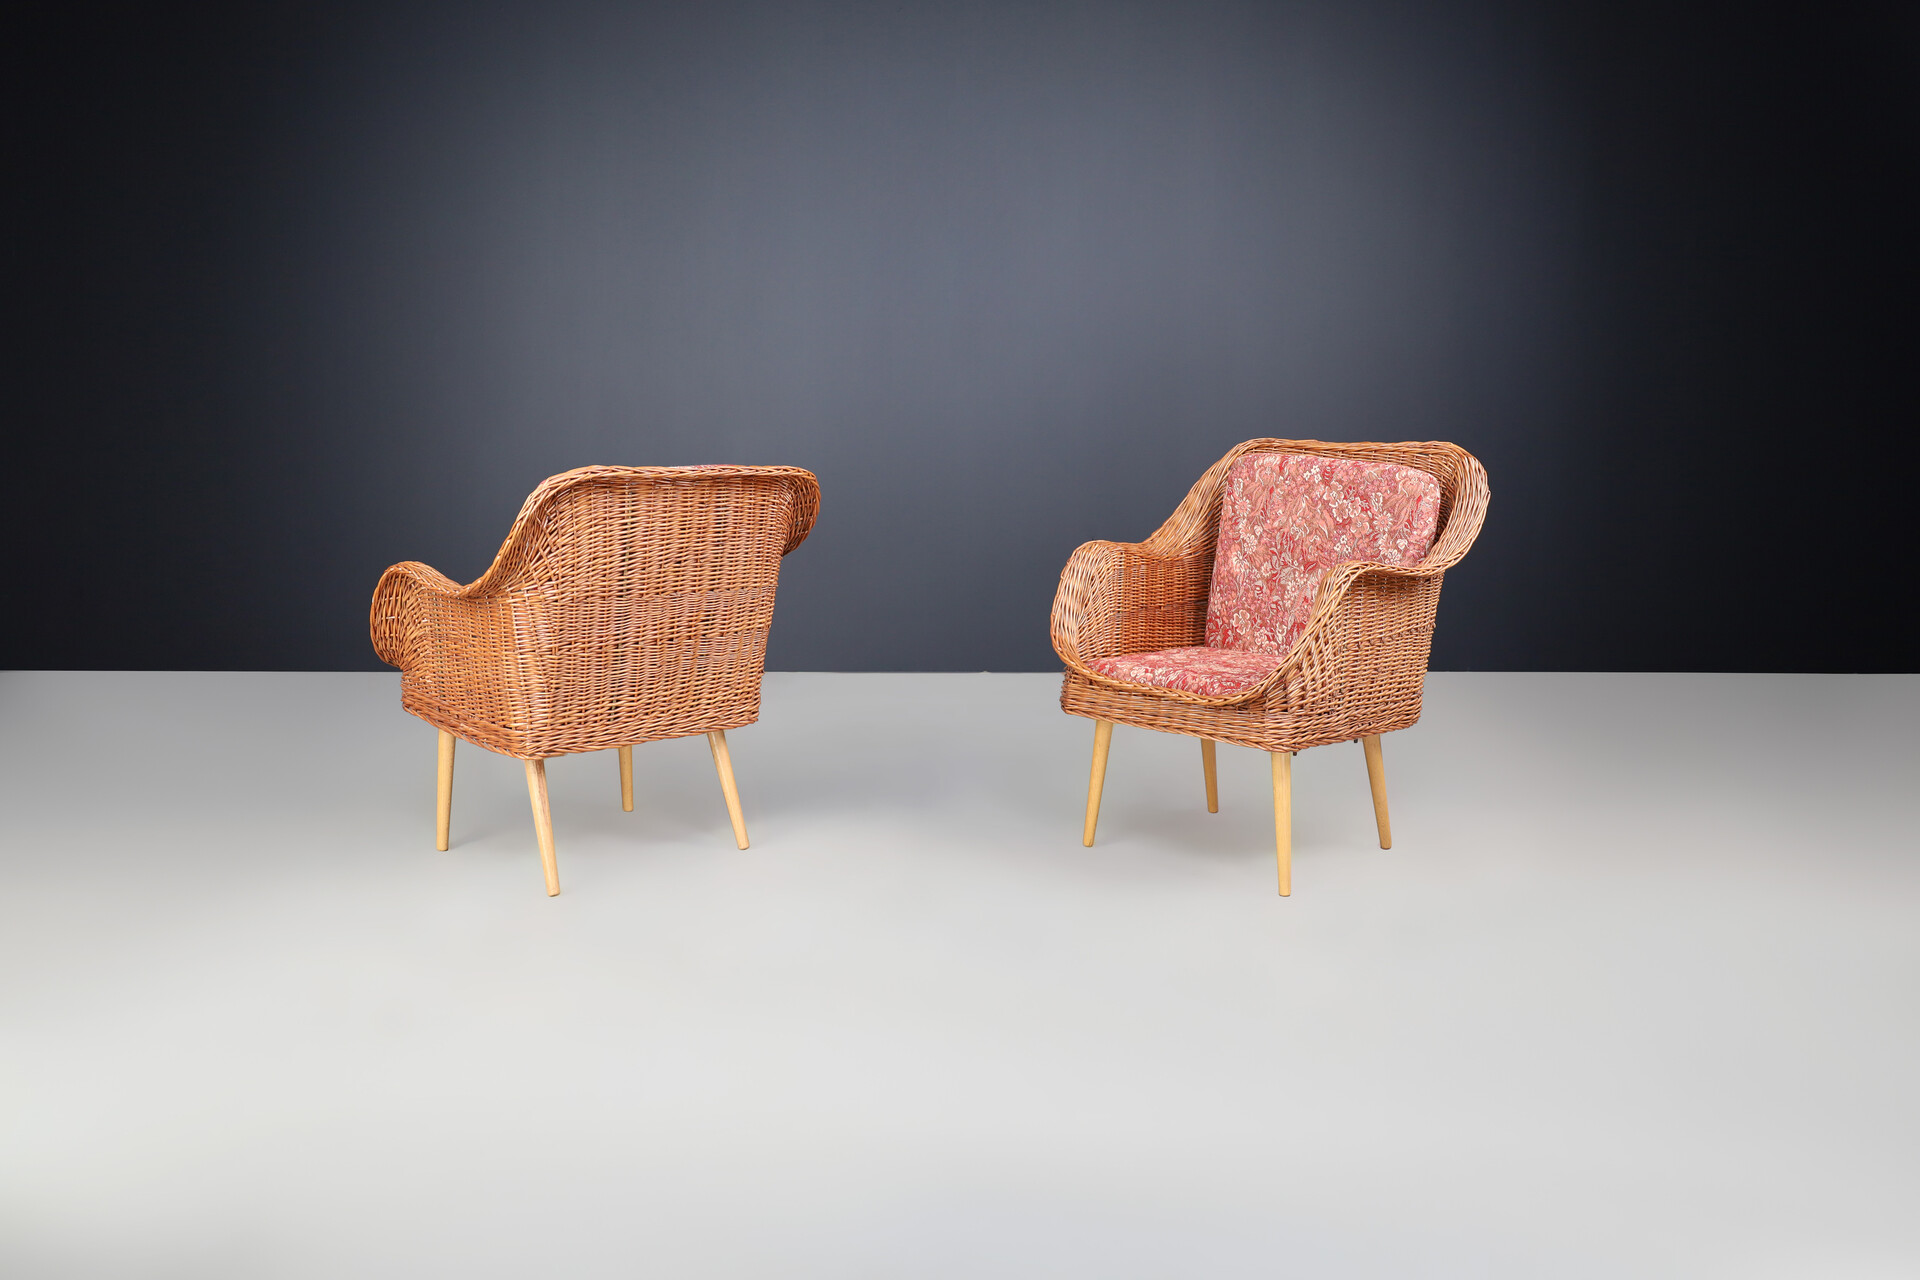 Mid century modern Rattan and wood armchairs, France 1950 Mid-20th century